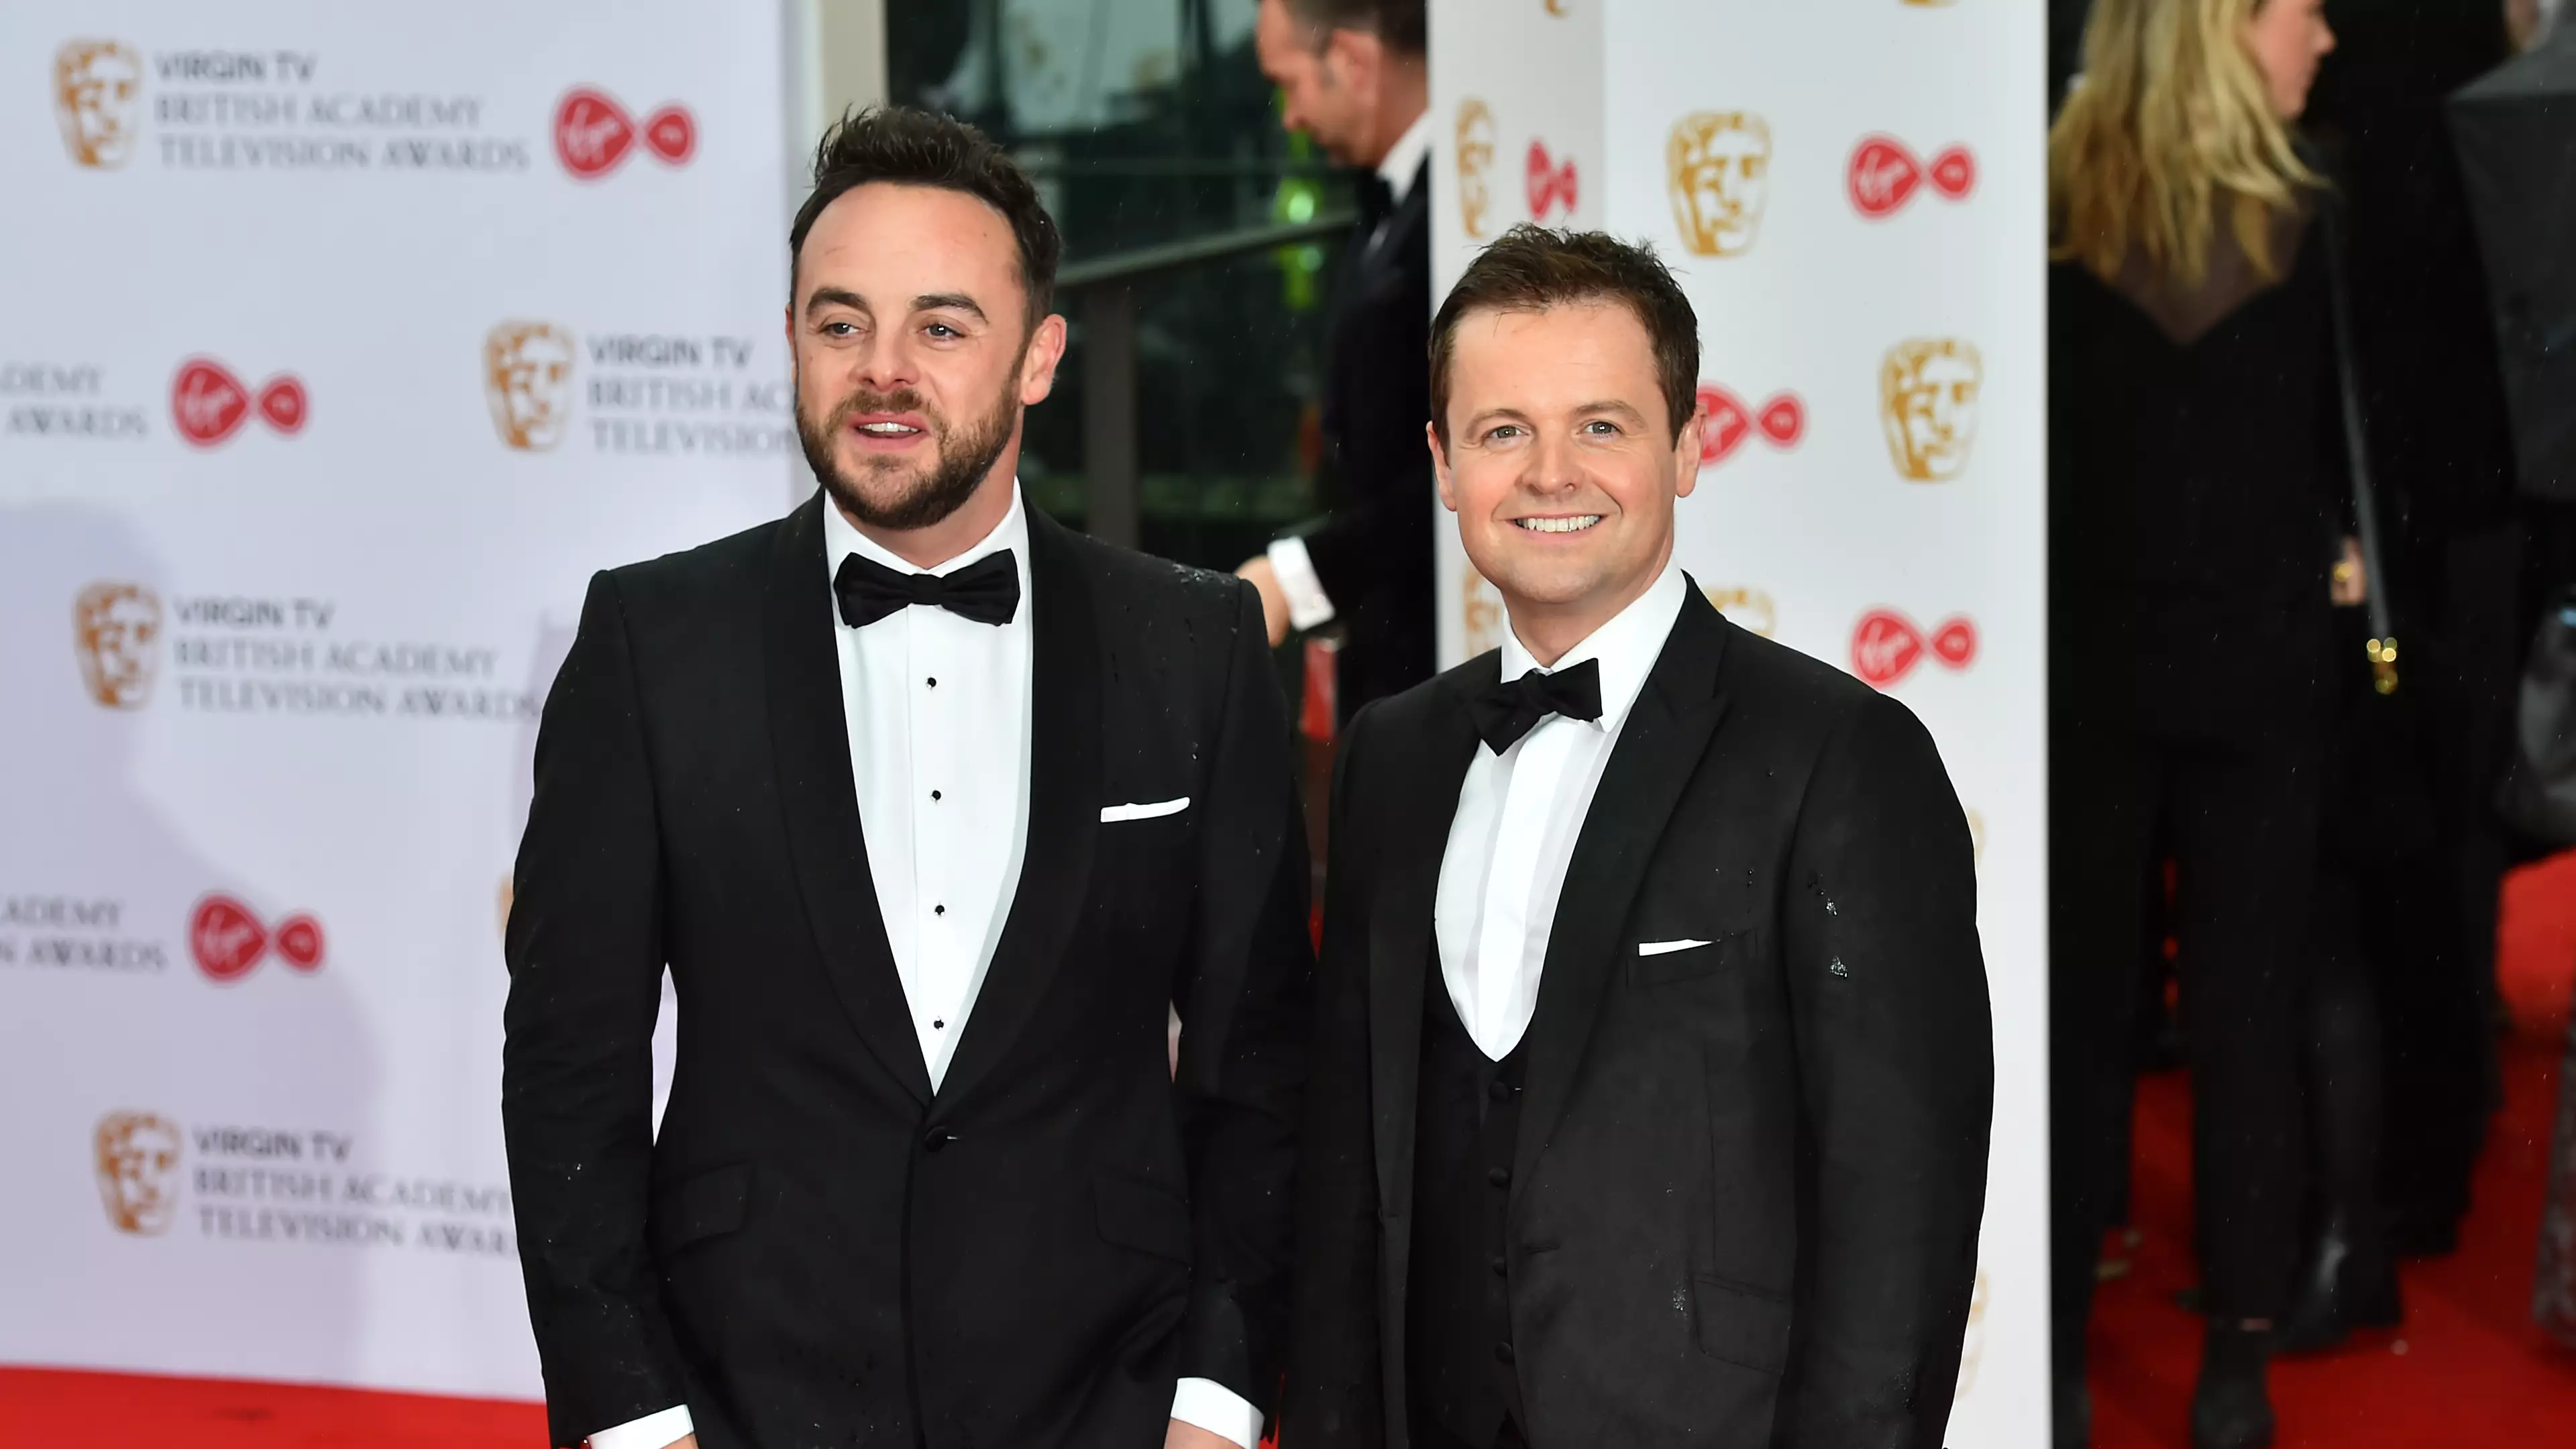 Ant And Dec Post First Picture Together After 10 Months Apart